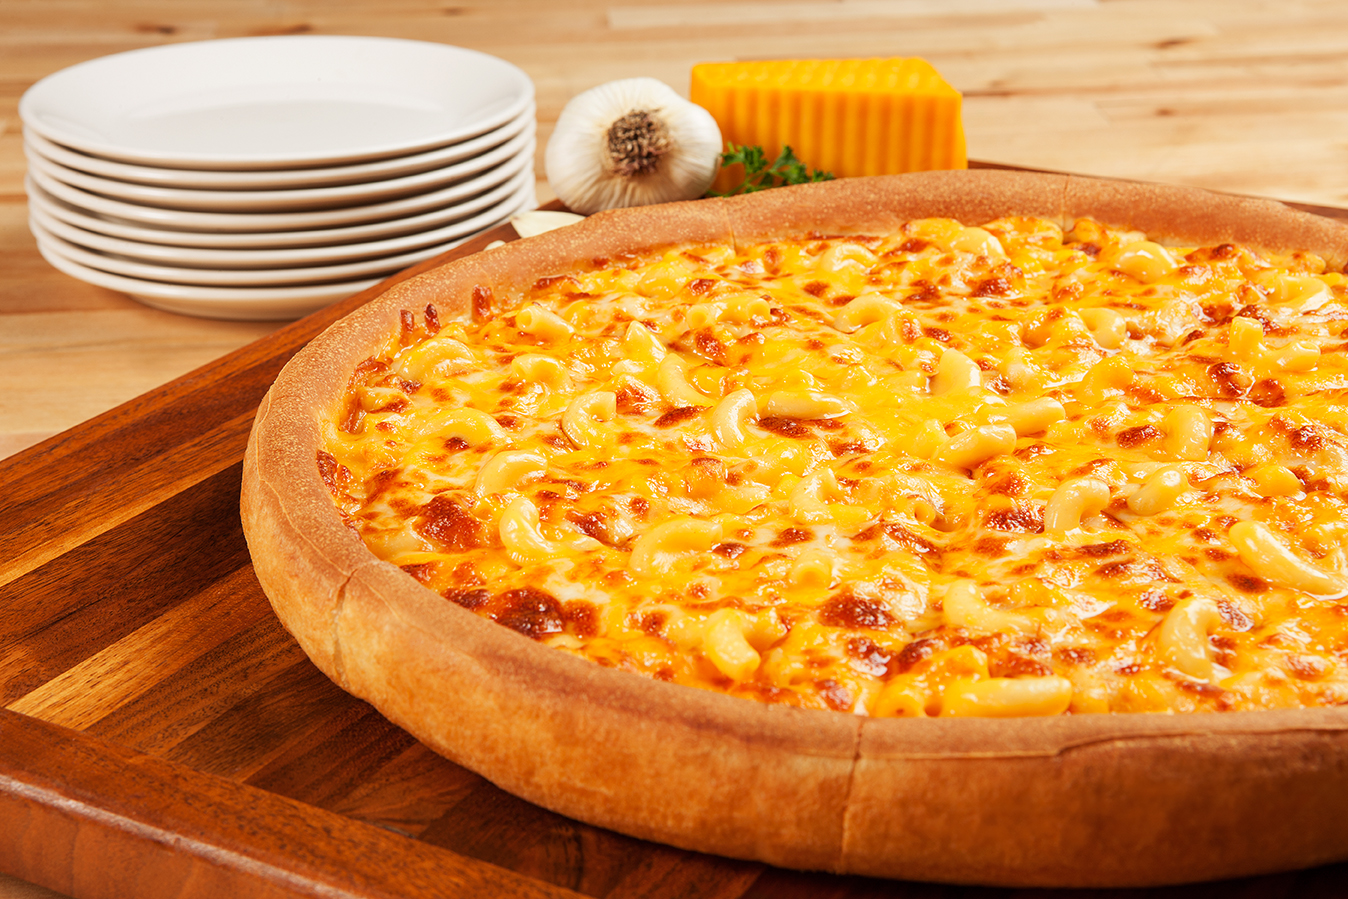 The Mac & Cheese Pizza is available at participating Godfather's Pizza locations through April 24, 2016.